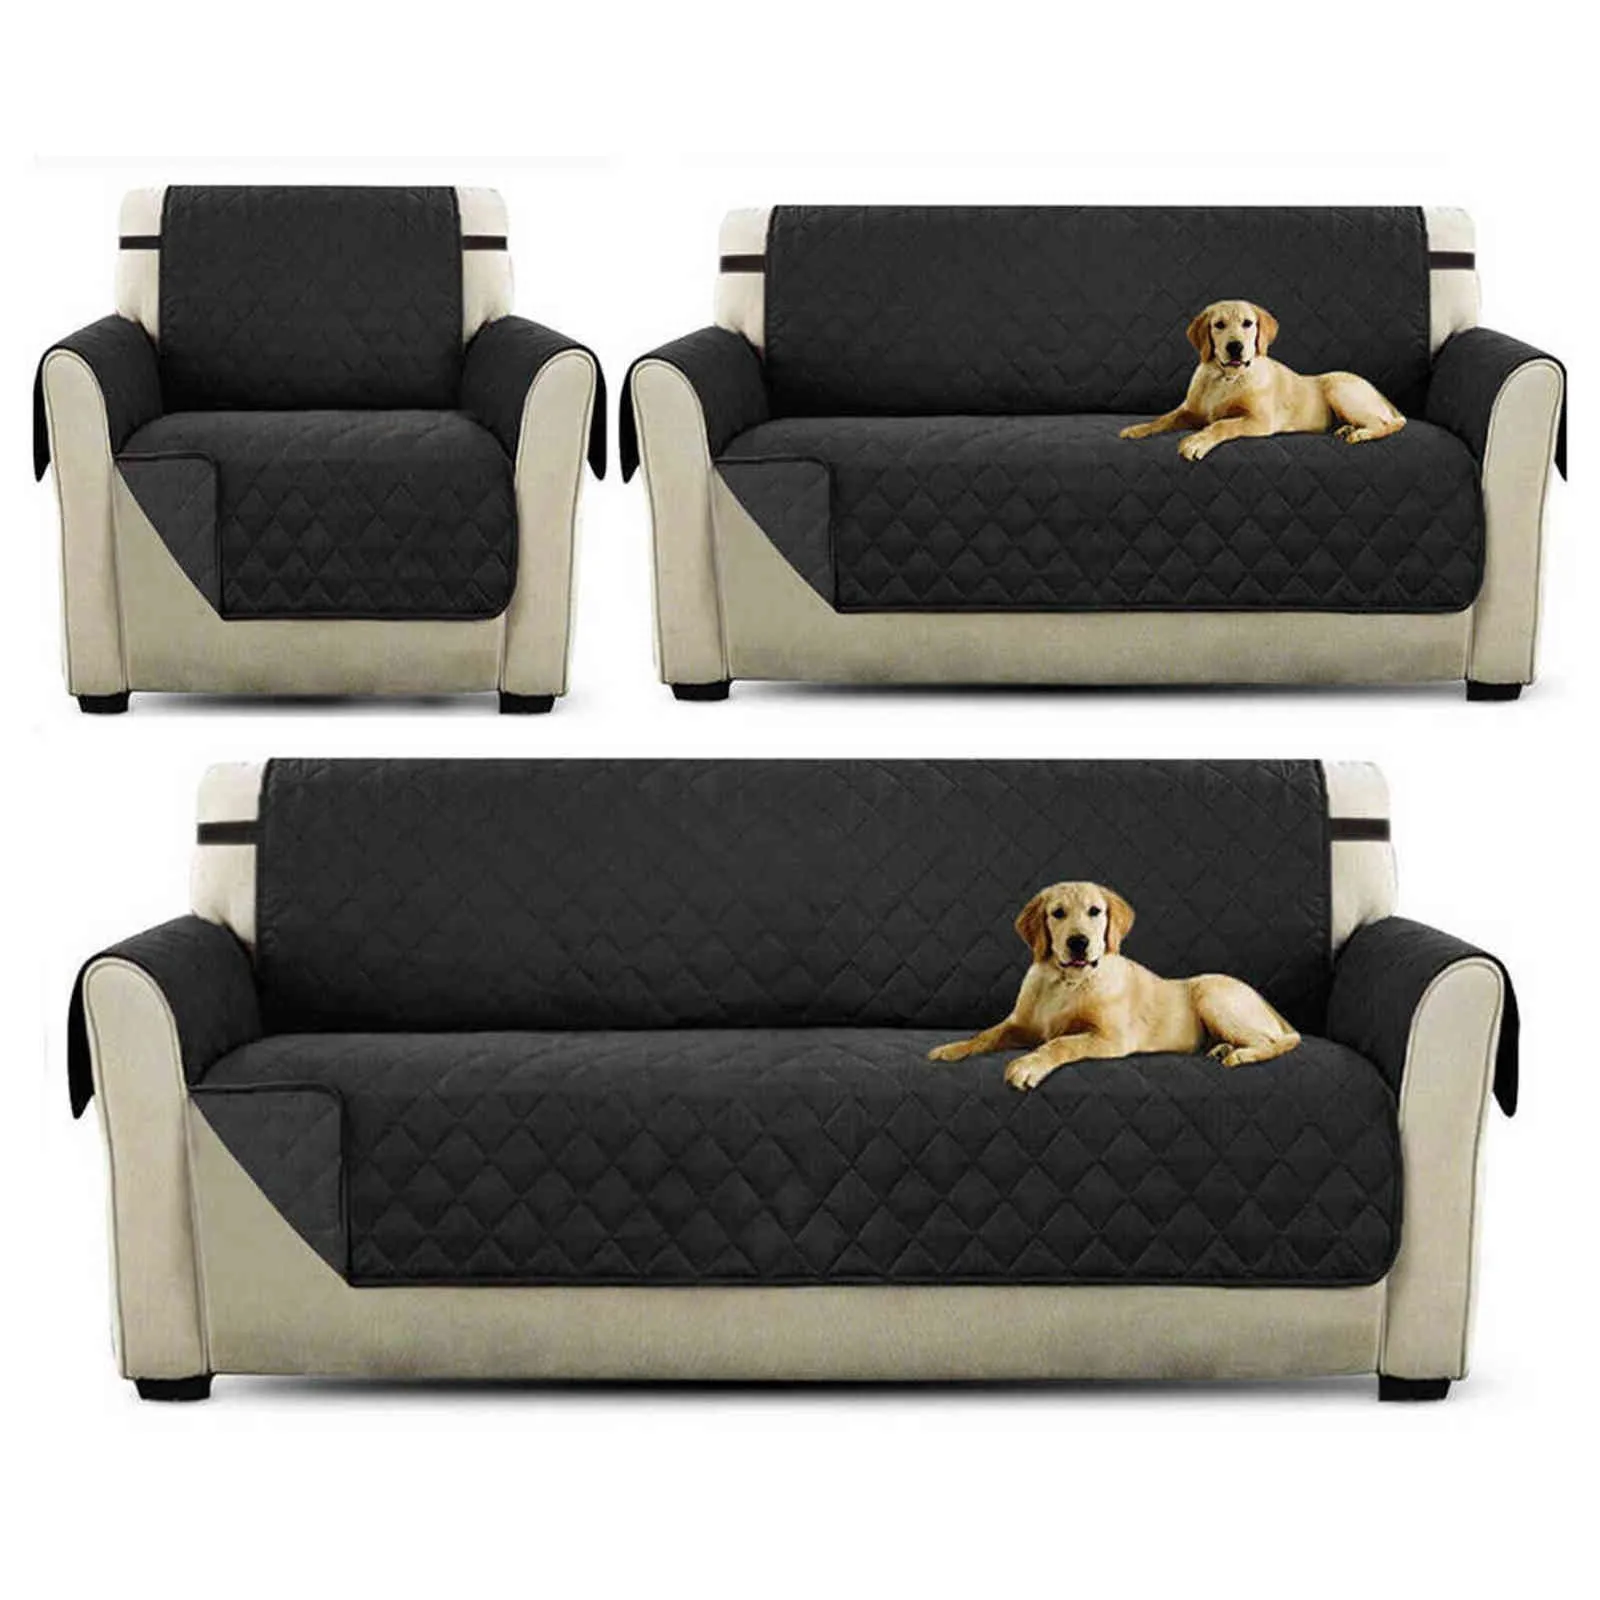 1/2/3 Sits Soffa Cover Living Room Couch Chair Protector Reversible Removable Slipcovers Bomull Tyg Mat 211116